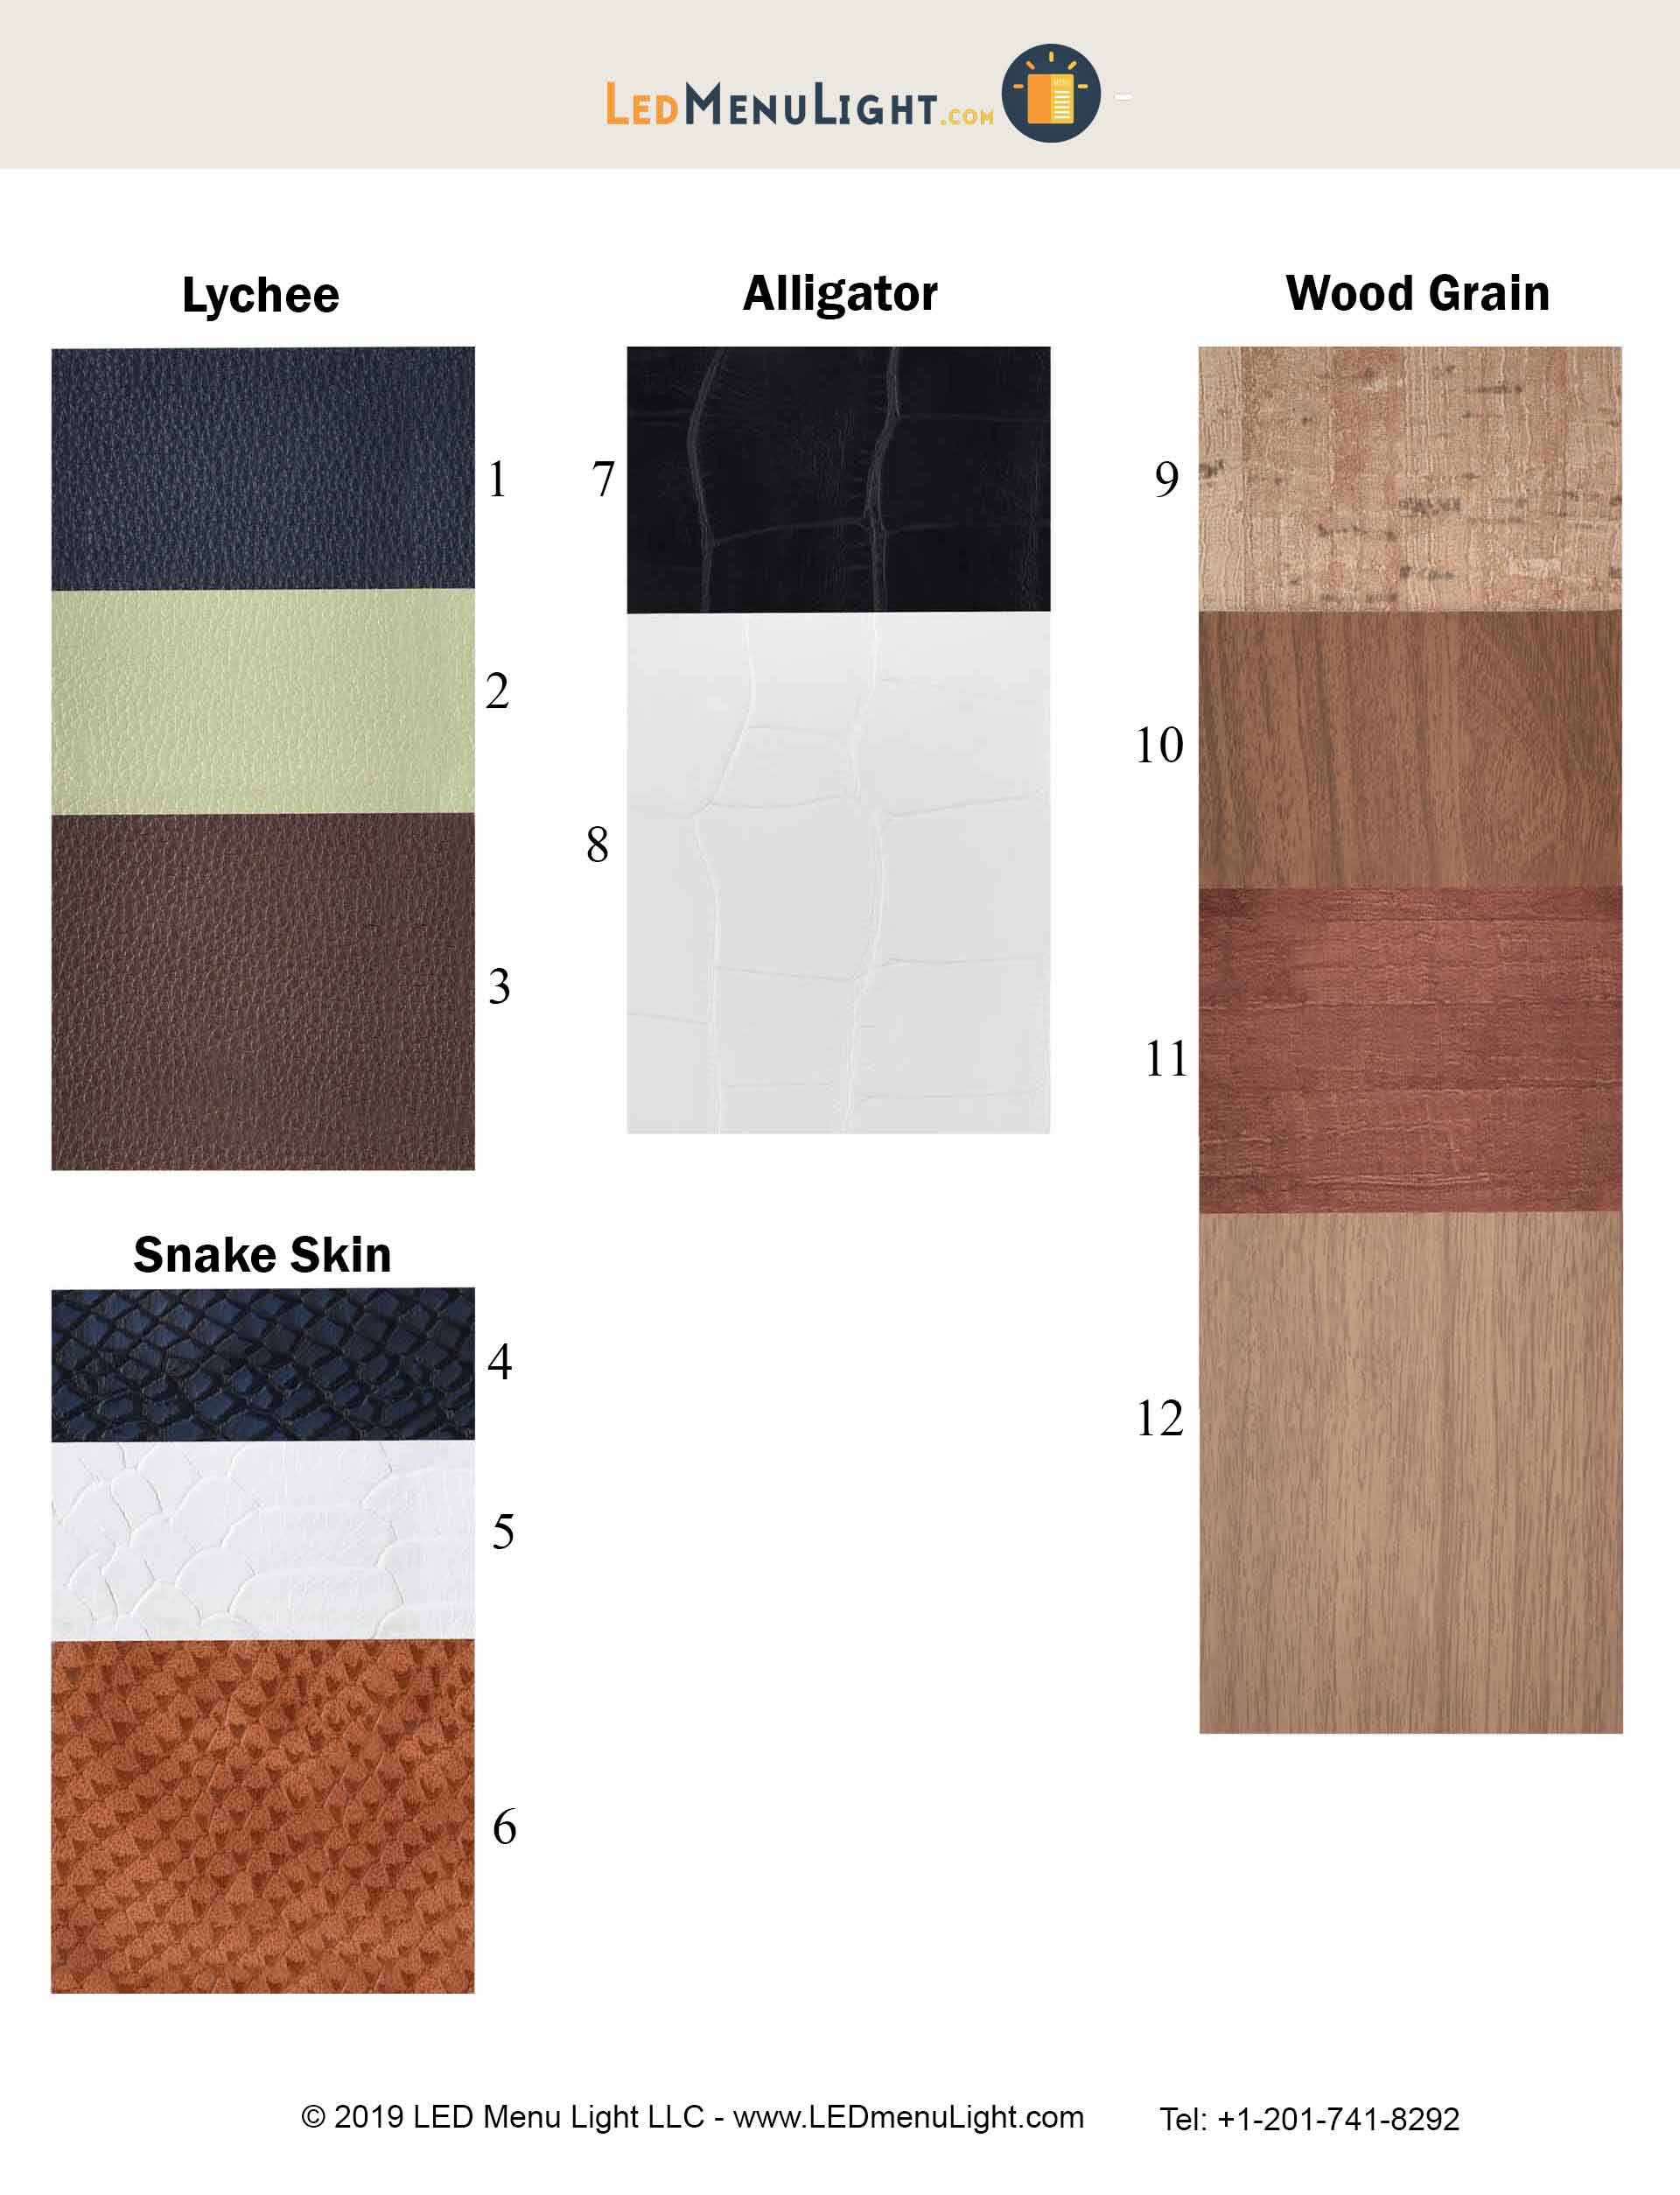 Color & Textures Swatches for sale - Lychee, Snakeskin, Alligator and Wood Grain Menu Cover Colors & Textures Selections Menu Cover Colors - LED Menu Light